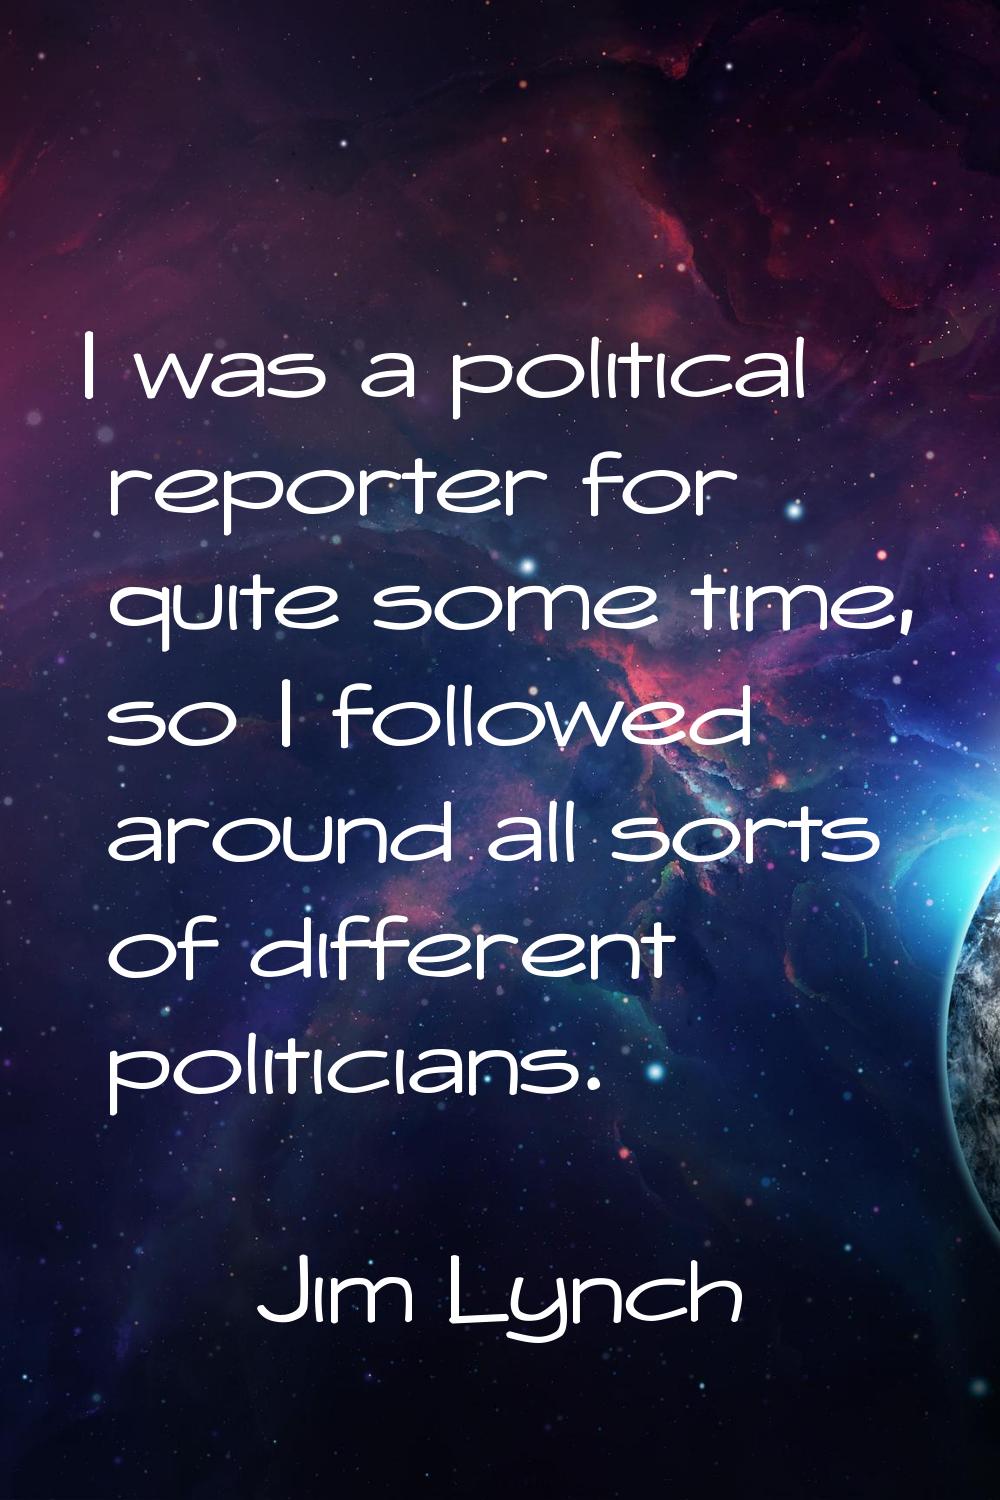 I was a political reporter for quite some time, so I followed around all sorts of different politic